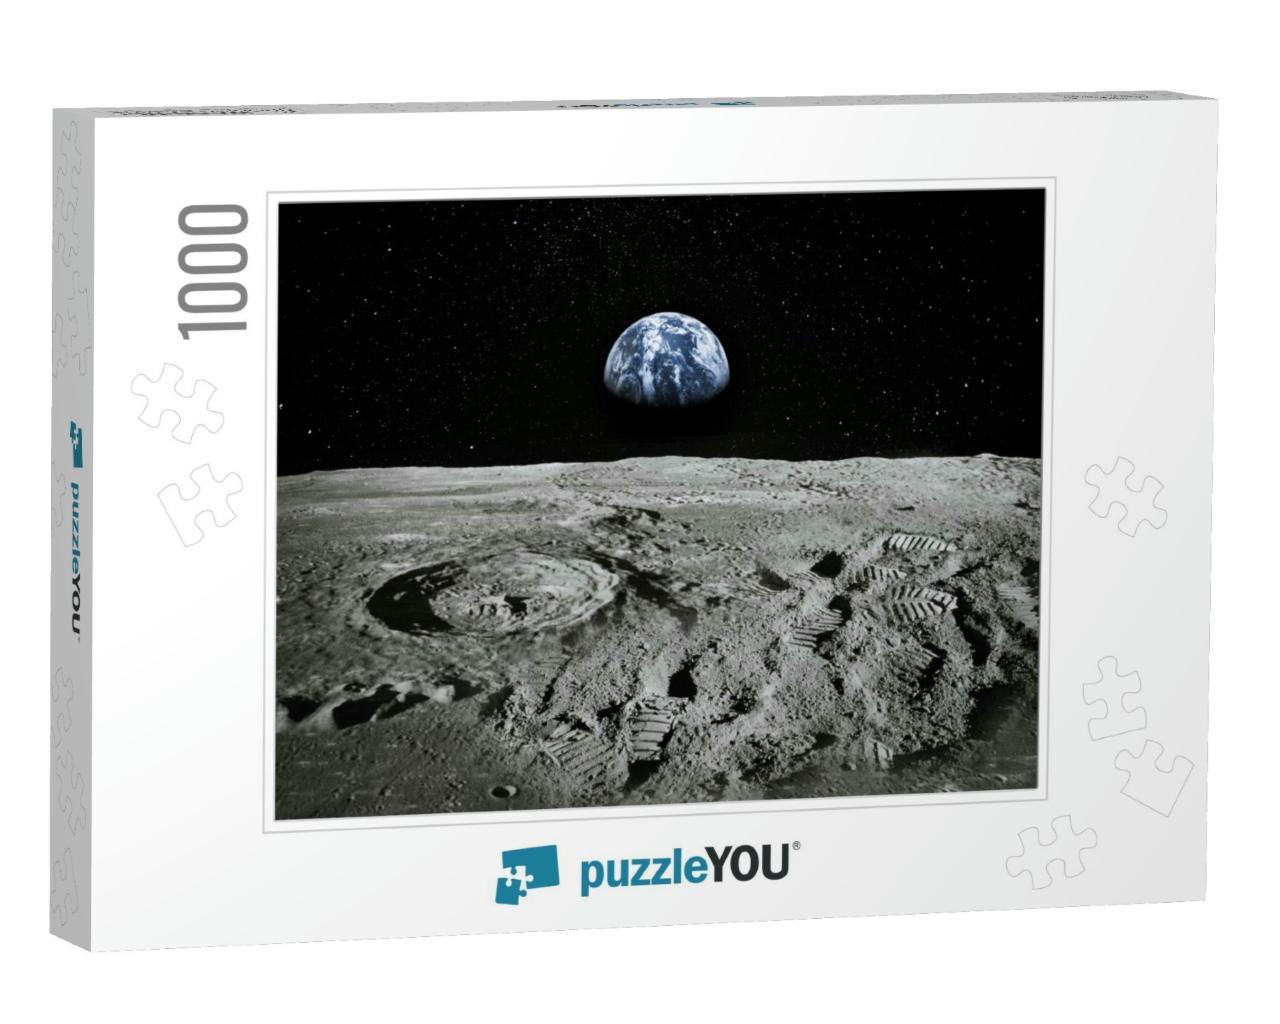 View of Moon Limb with Earth Rising on the Horizon. Footp... Jigsaw Puzzle with 1000 pieces